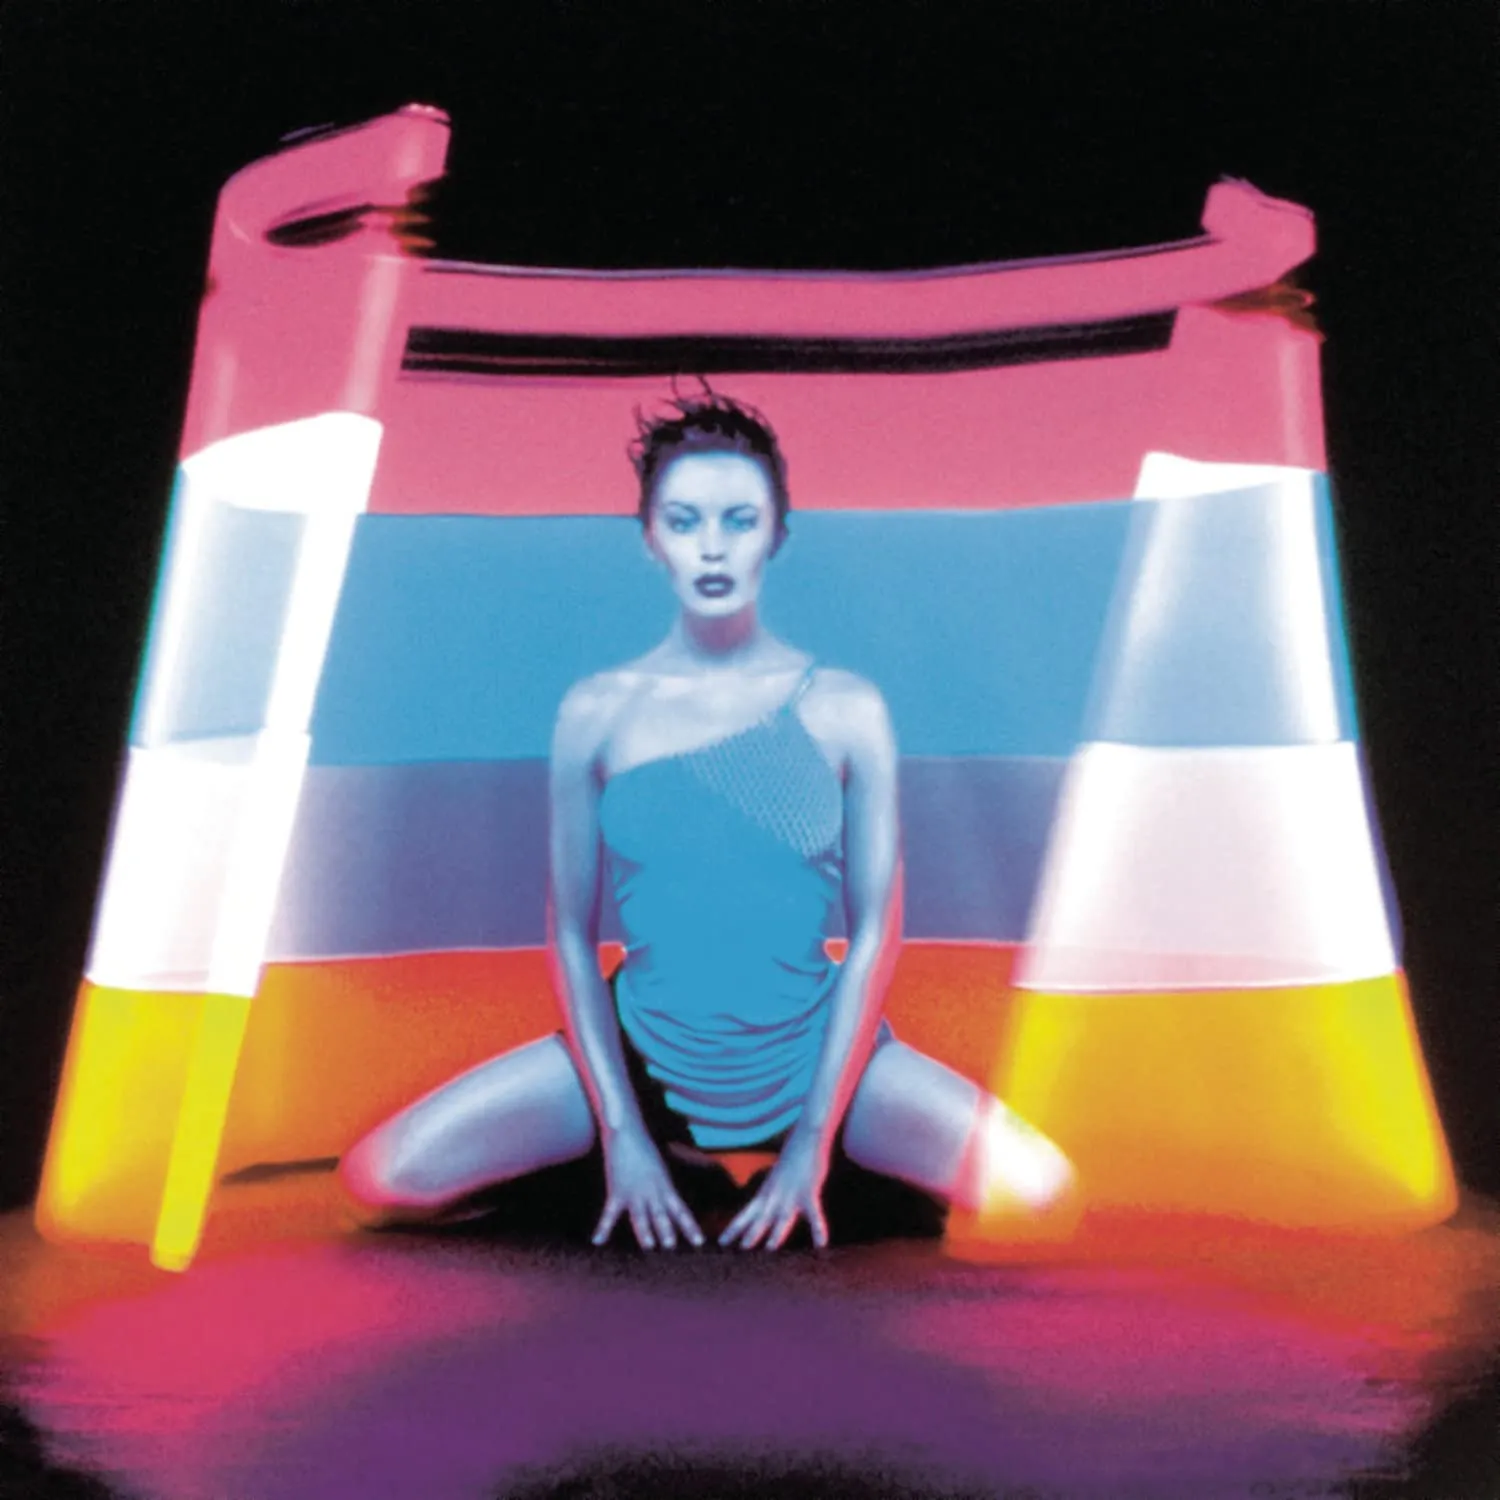 The album artwork for Impossible Princess by Kylie Minogue